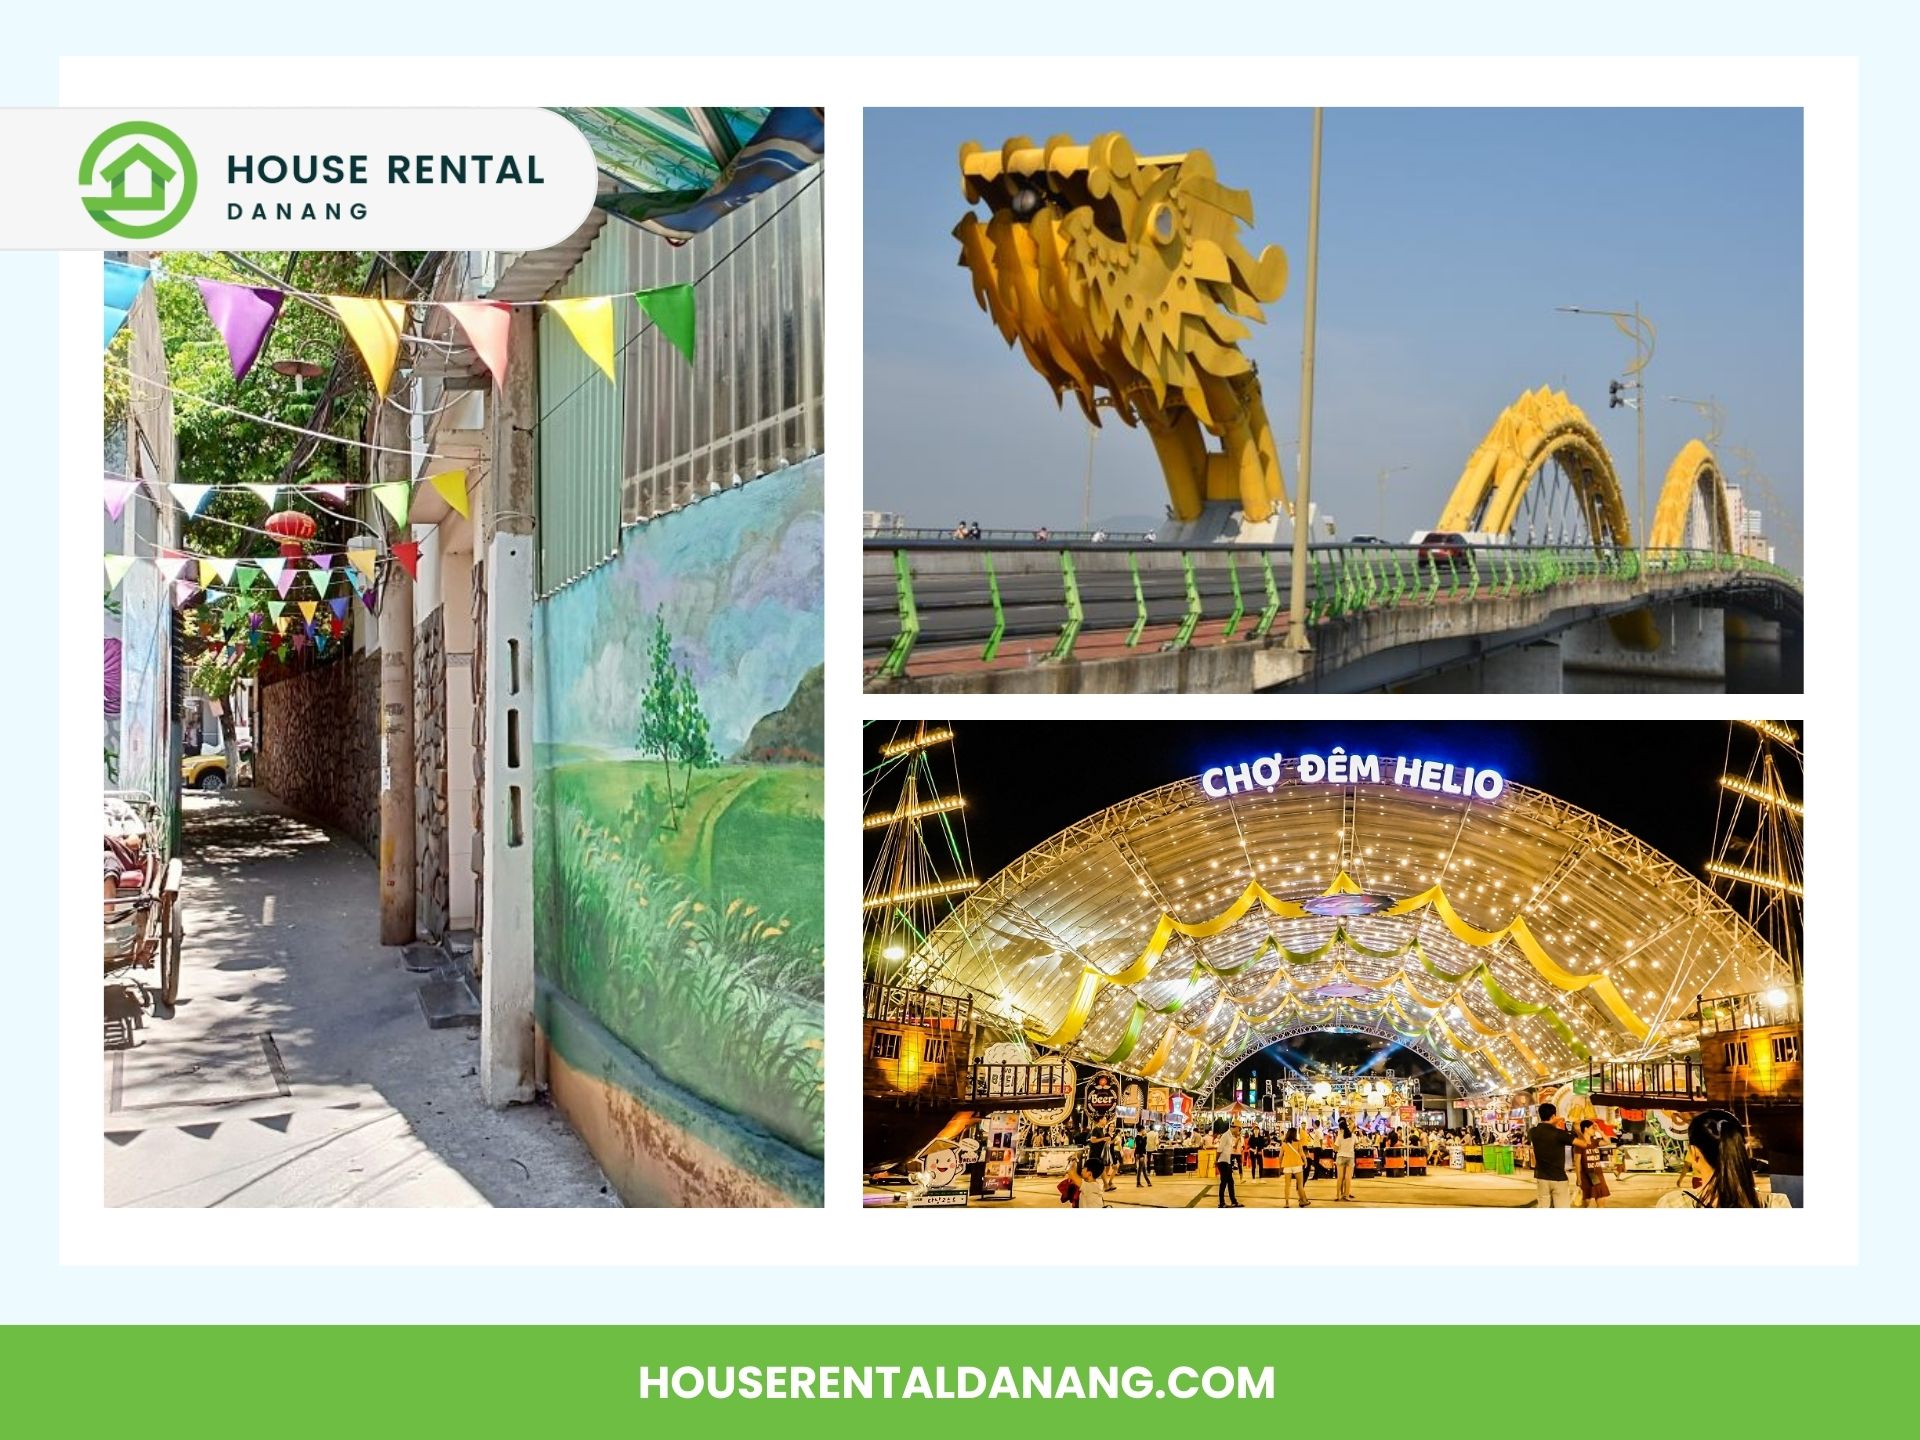 Collage: Colorful alley with murals and flags, Dragon Bridge over a river, the Museum of Cham Sculpture in Da Nang showcasing ancient artifacts, and Helio Night Market in Da Nang with bright lights. House Rental Da Nang logo and website URL included.